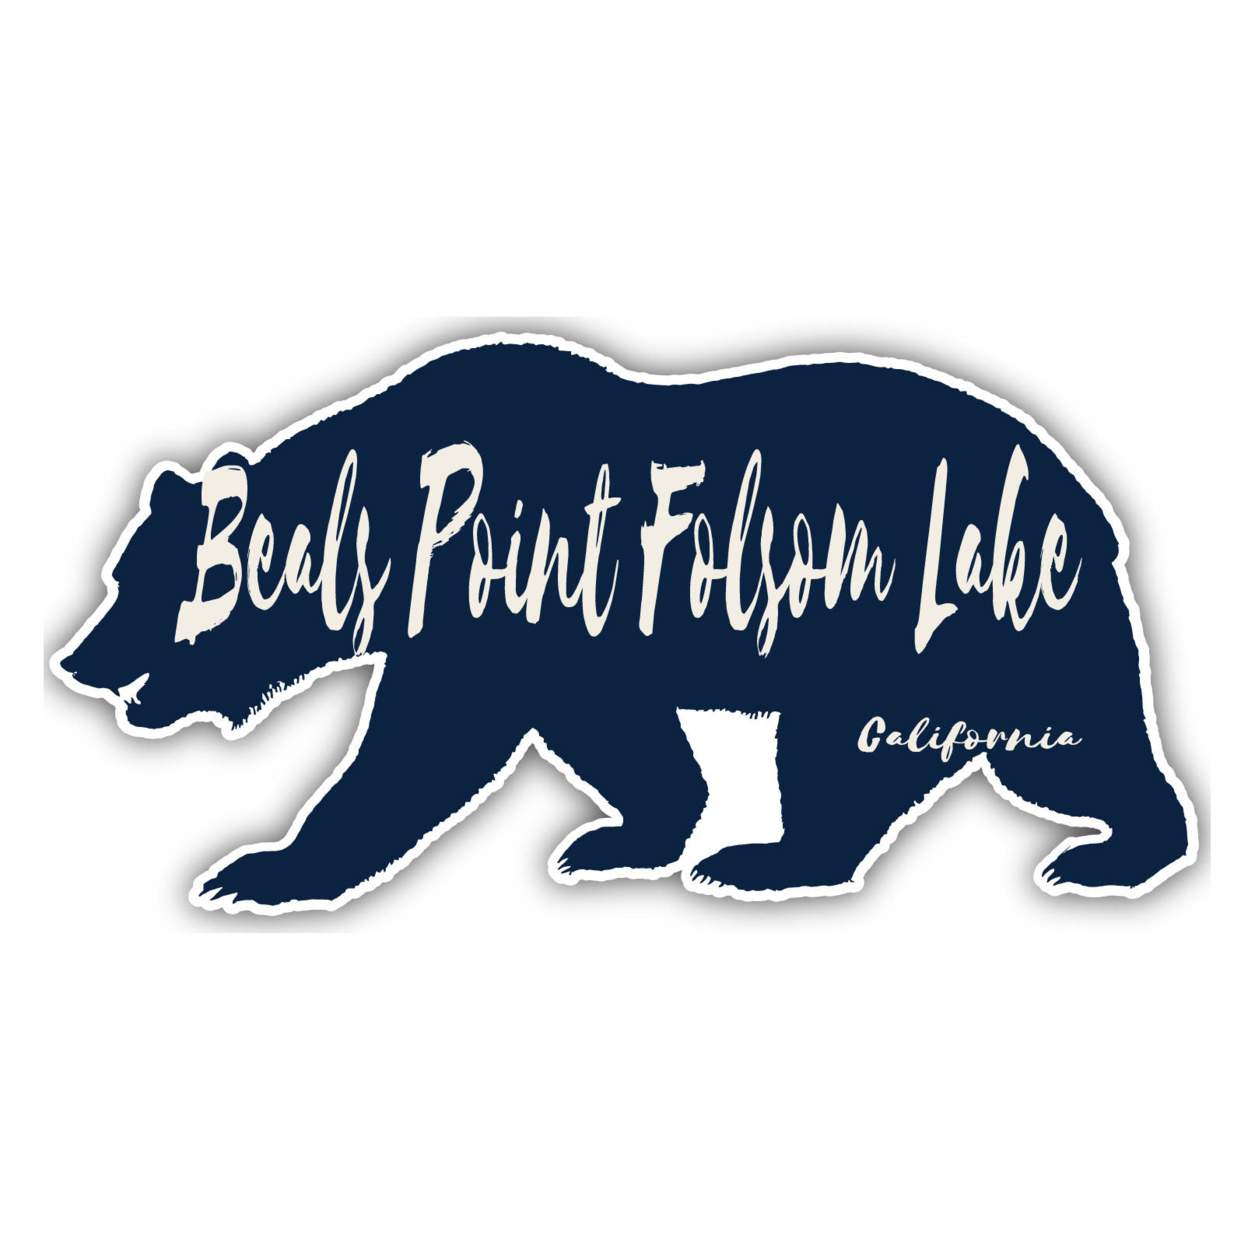 Beals Point Folsom Lake California Souvenir Decorative Stickers (Choose Theme And Size) - 4-Pack, 6-Inch, Camp Life